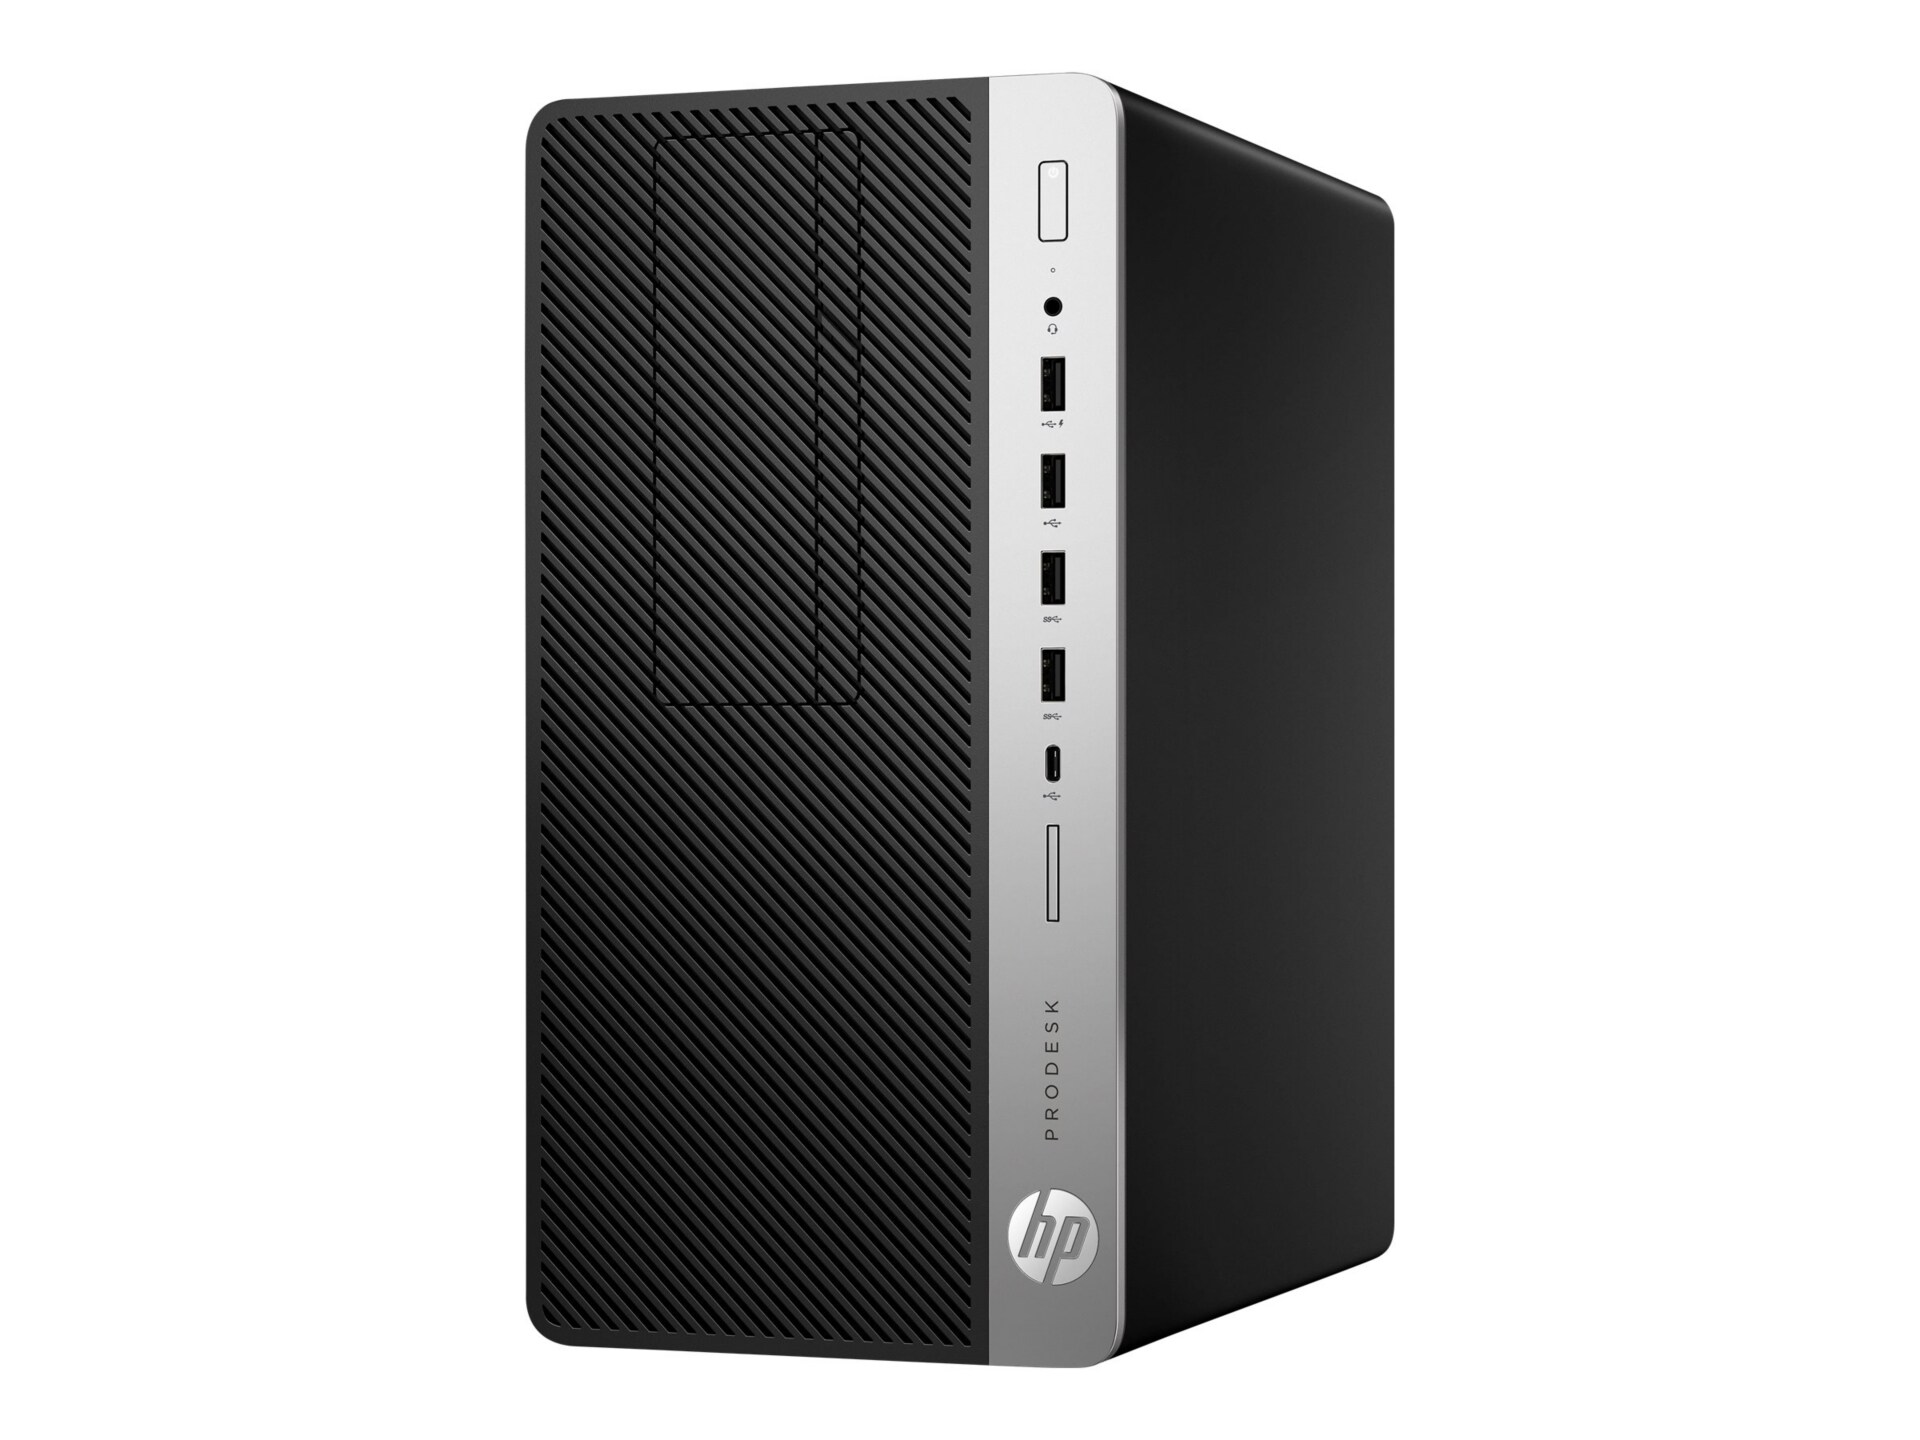 HP ProDesk 600 G3 - micro tower - Core i7 7700 3.6 GHz - 8 GB - HDD 1 TB - Canadian French